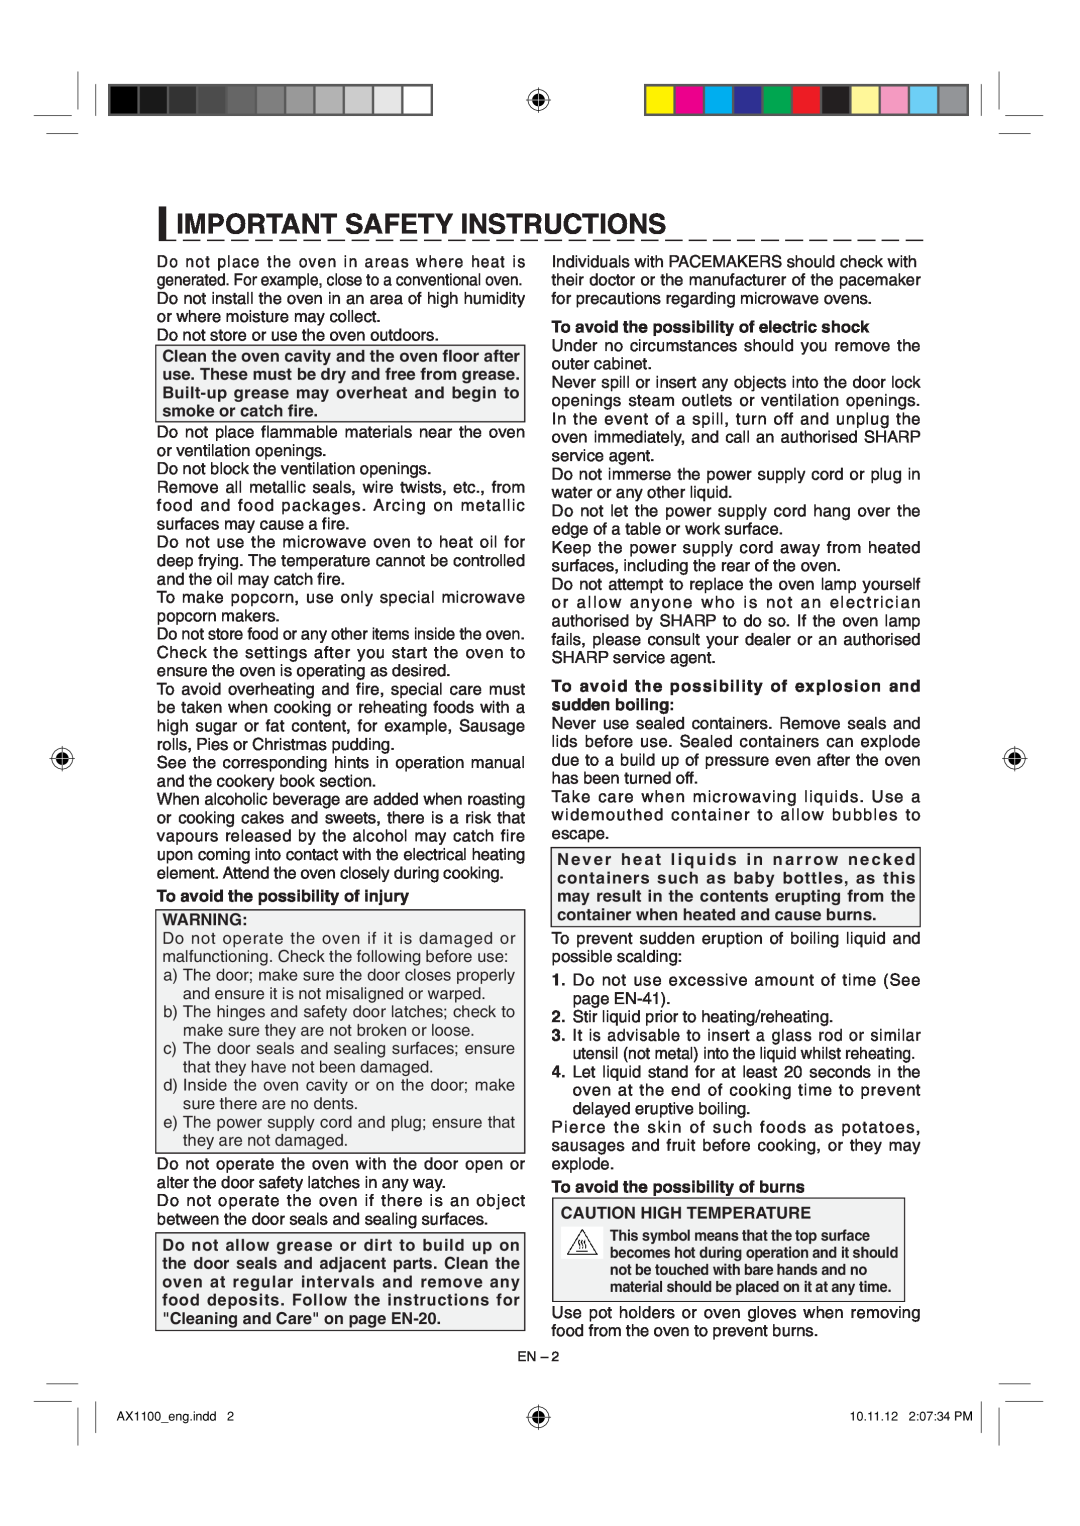 Sharp AX-1100 operation manual Important Safety Instructions, To avoid the possibility of injury 